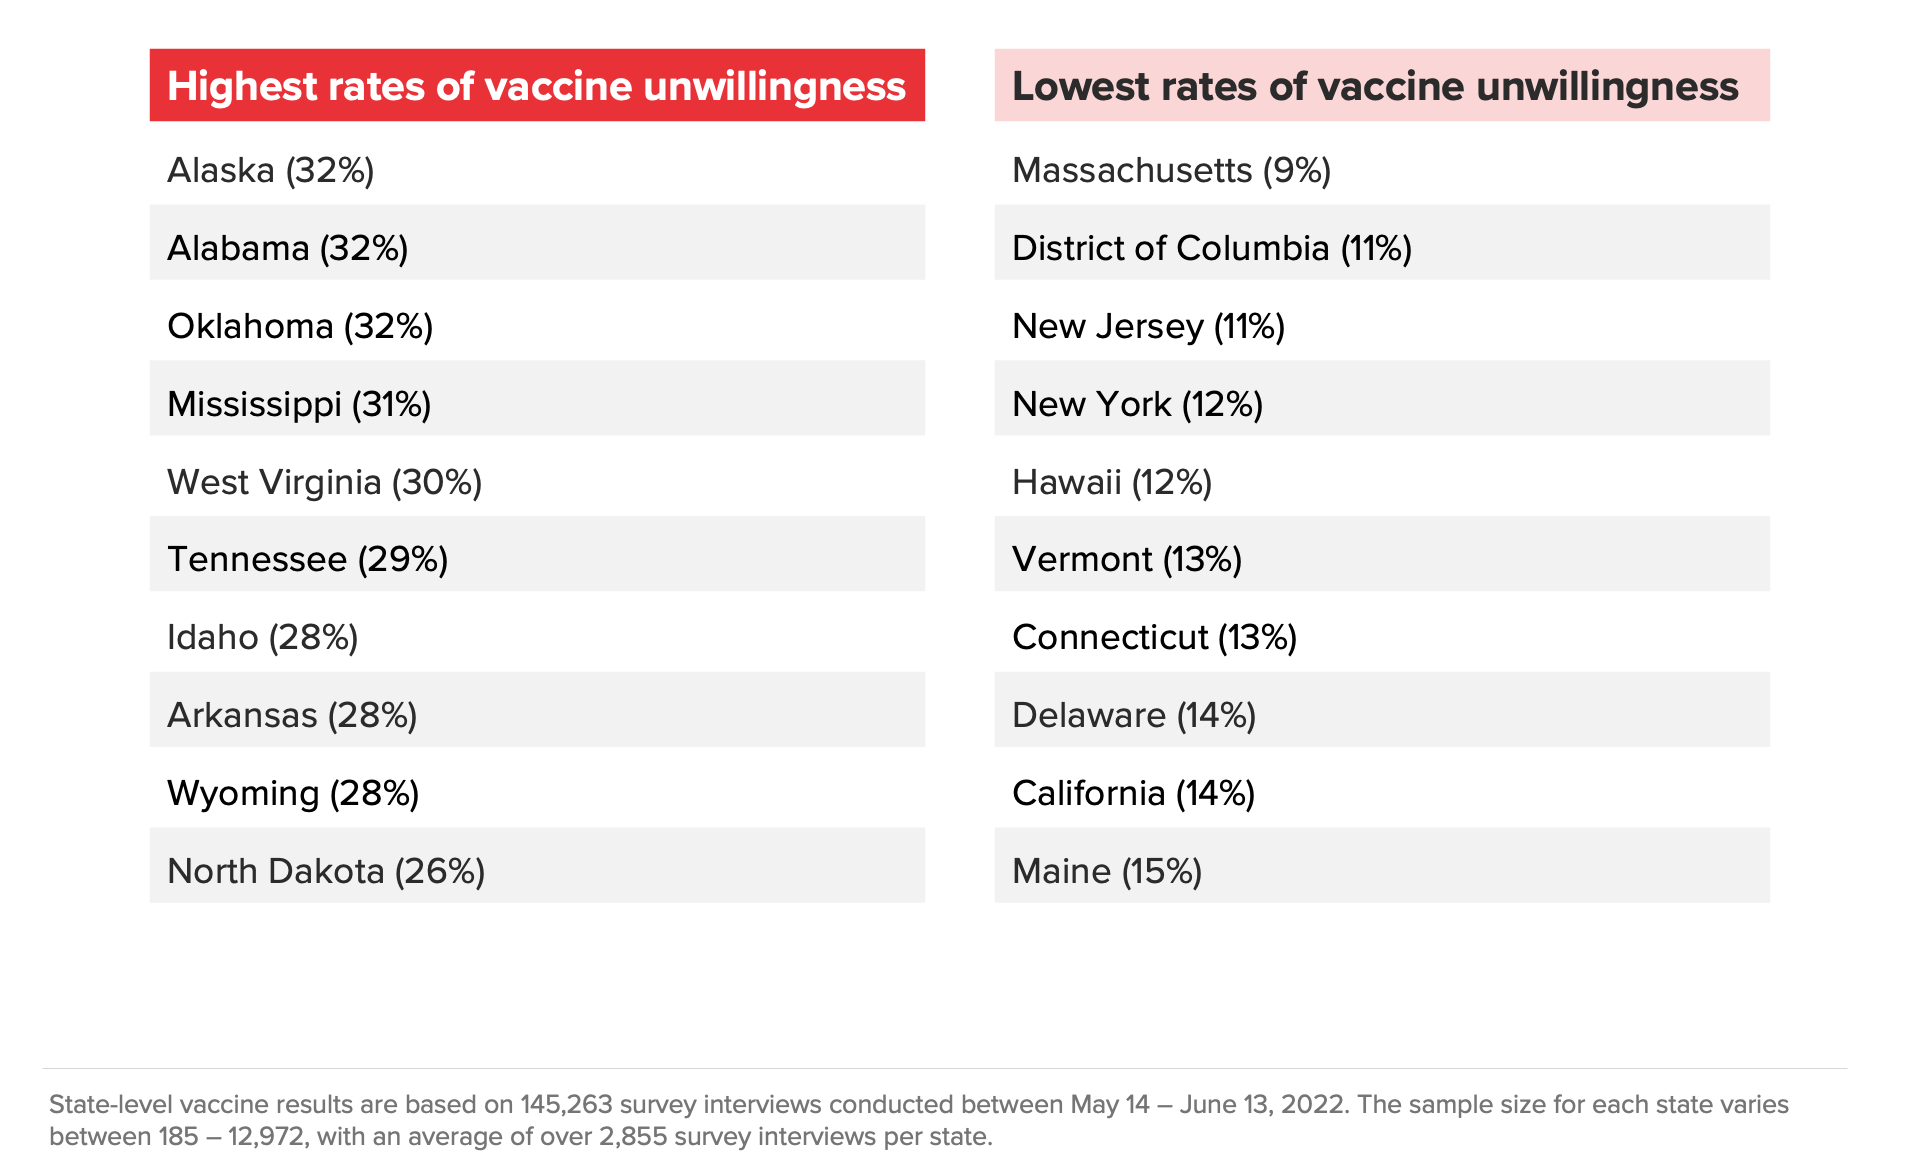 Graphic conveying the states with the highest and lowest rates of vaccine unwillingness